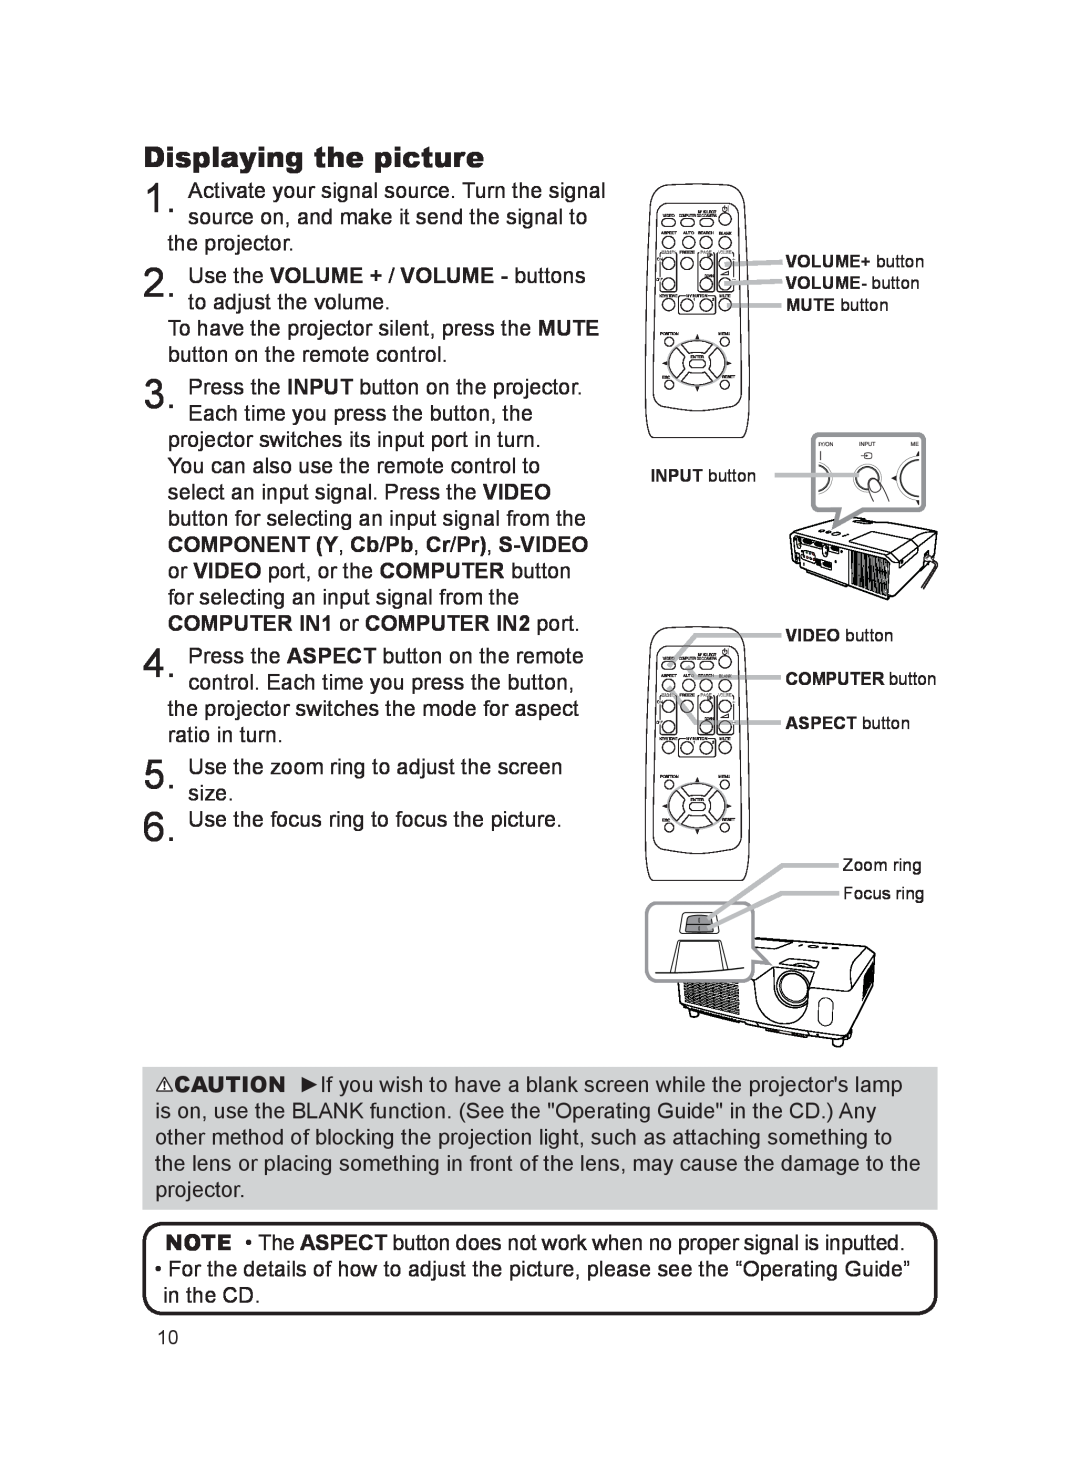 Dukane 8755K, 8923H, 8922H user manual Displaying the picture 